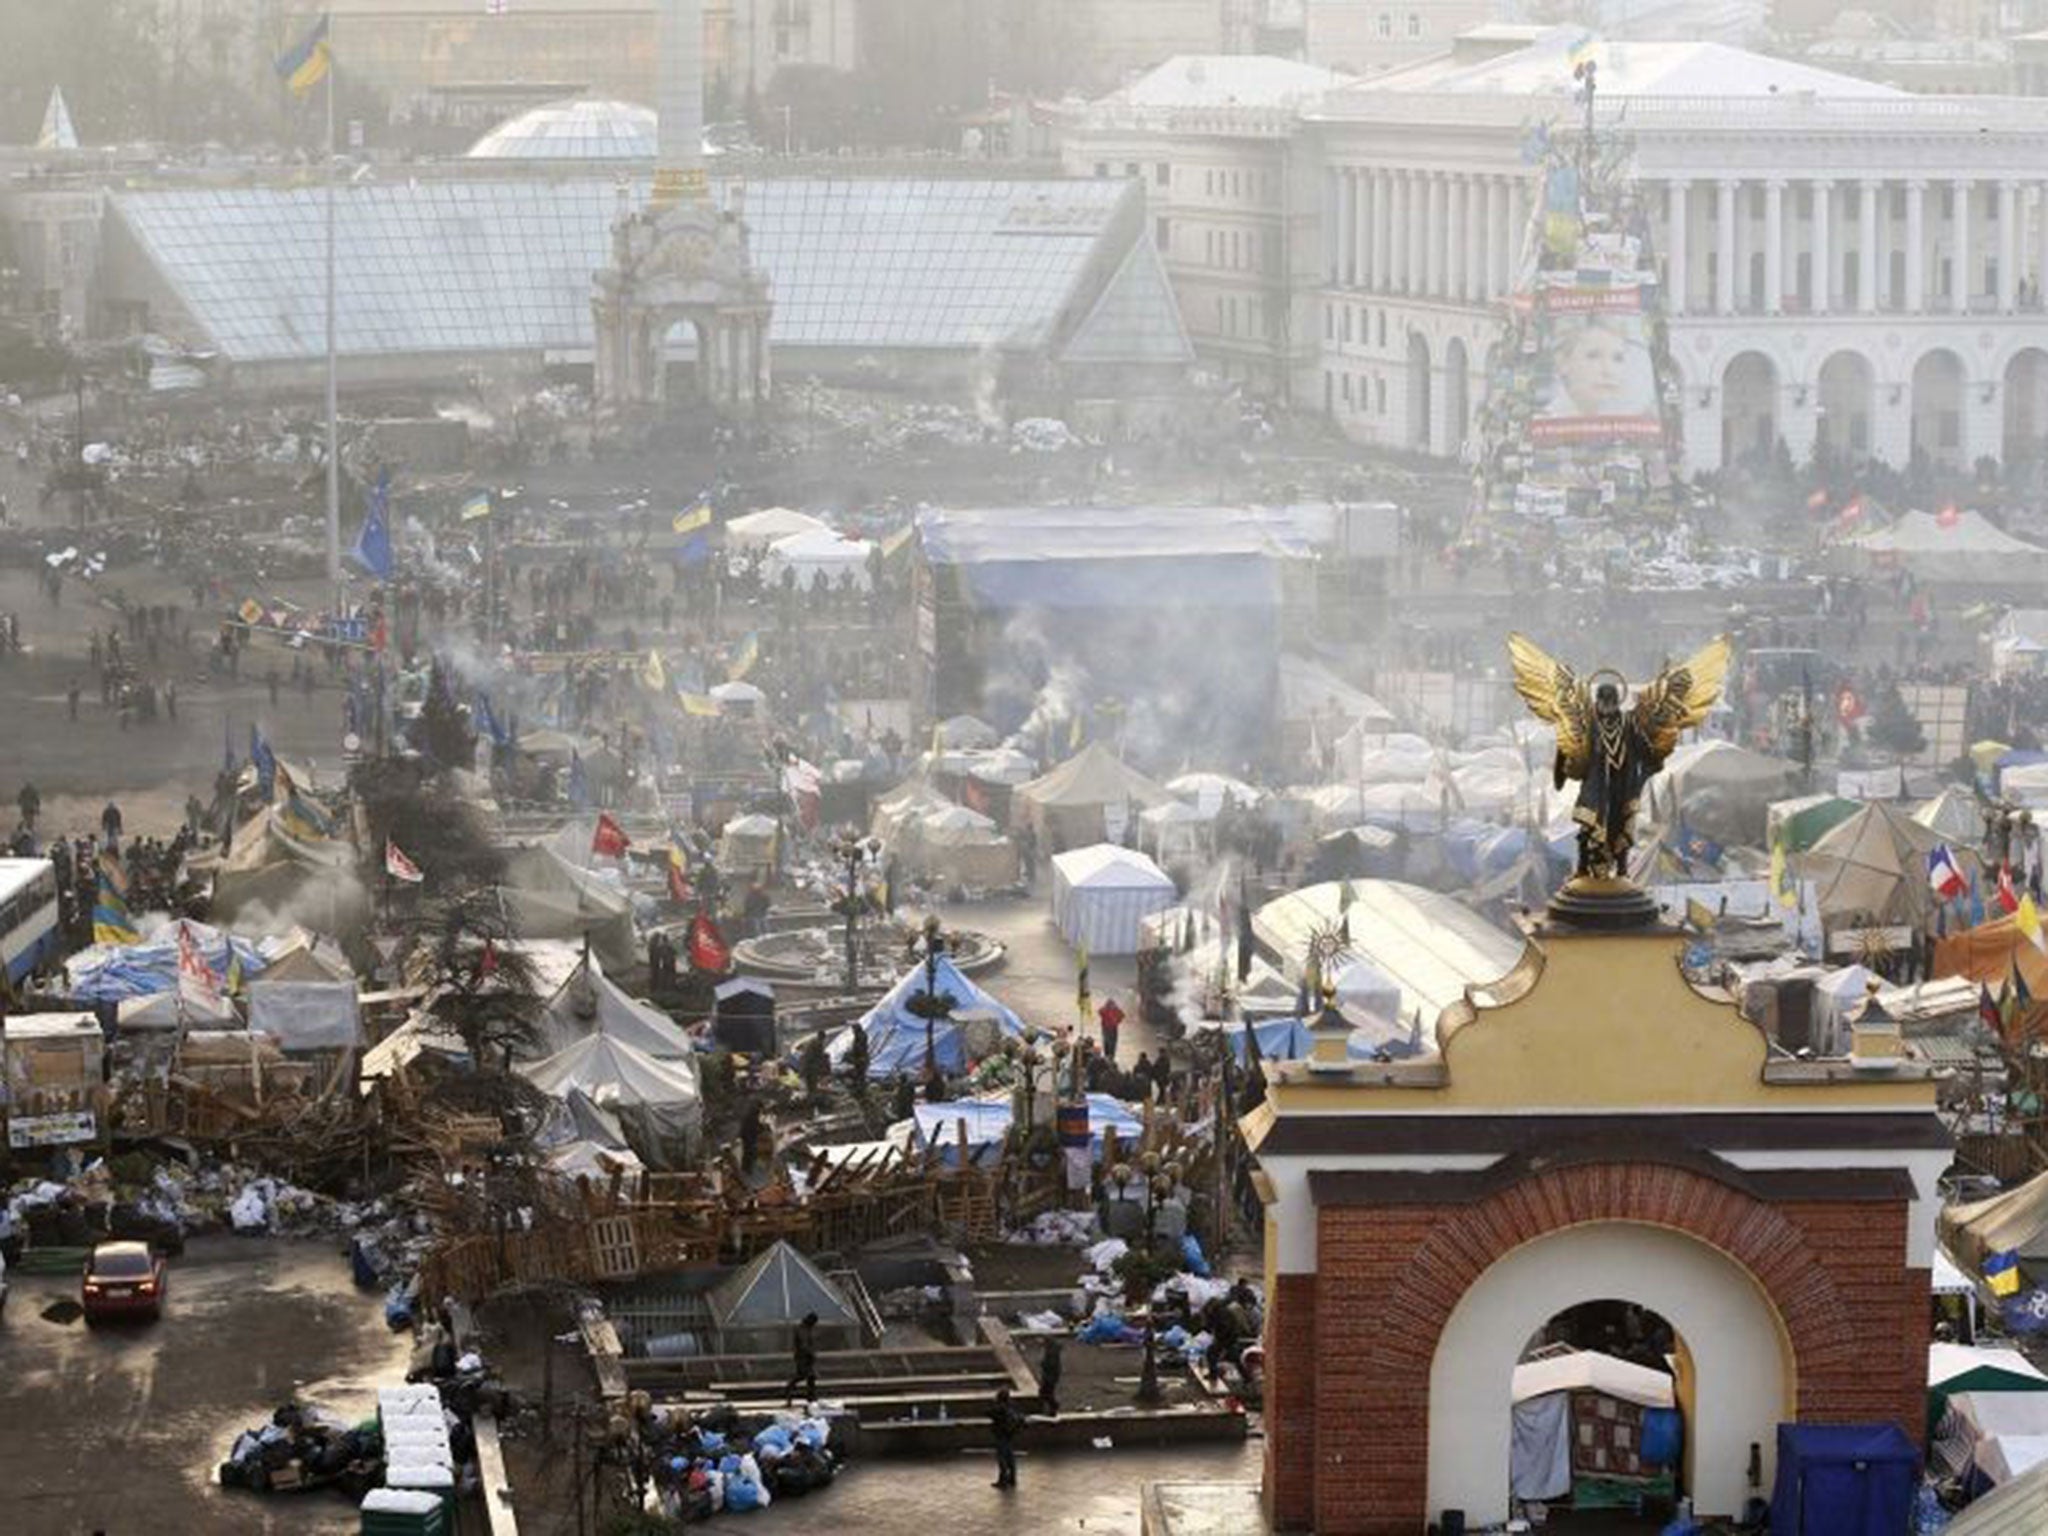 The scene in Kiev's Independence Square on Friday morning